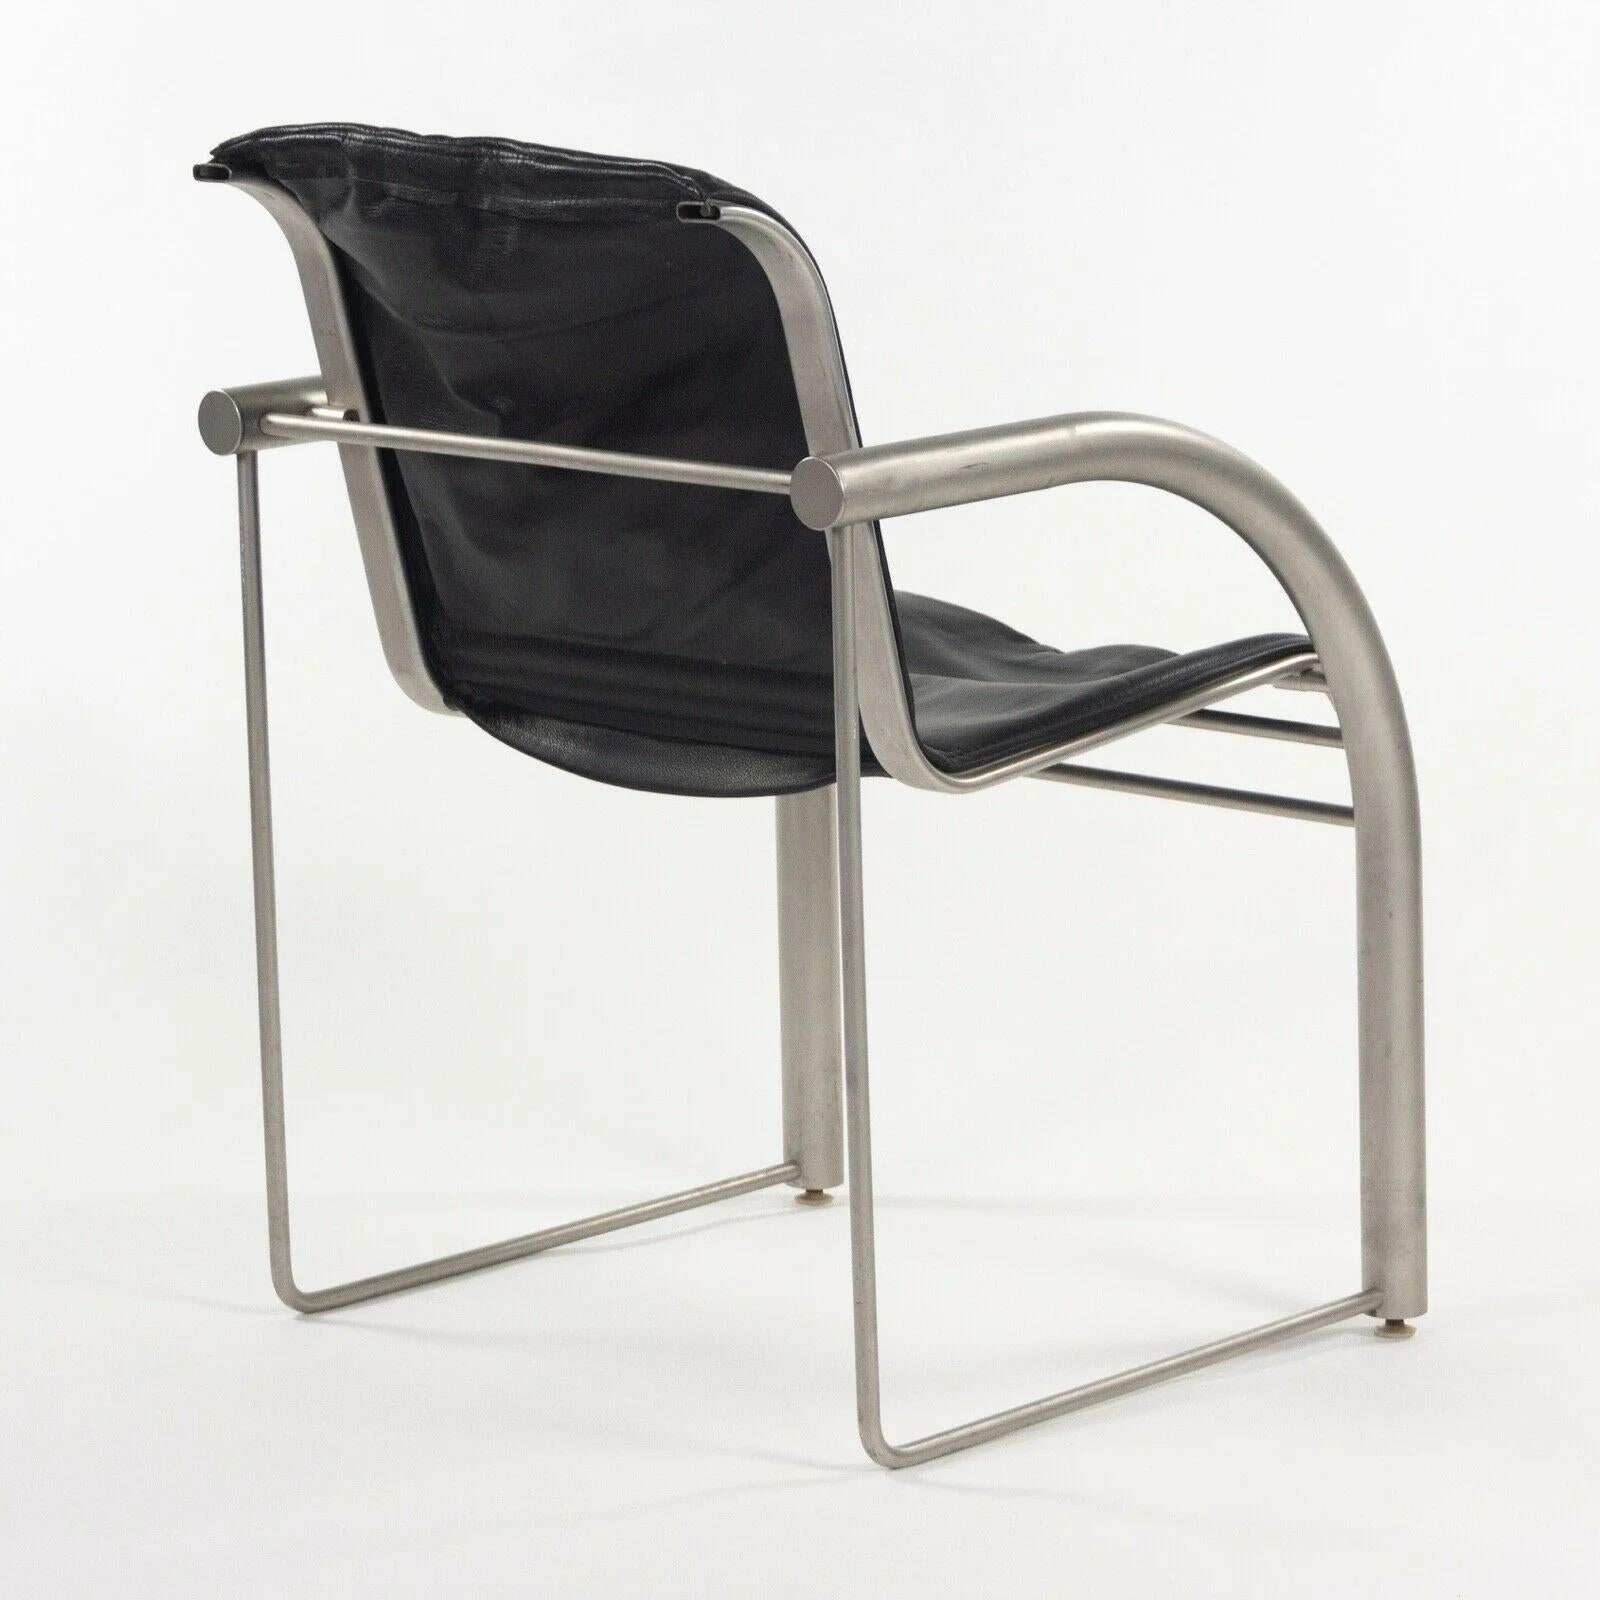 Prototype Richard Schultz 2002 Collection Stainless & Leather Dining Chair In Good Condition For Sale In Philadelphia, PA